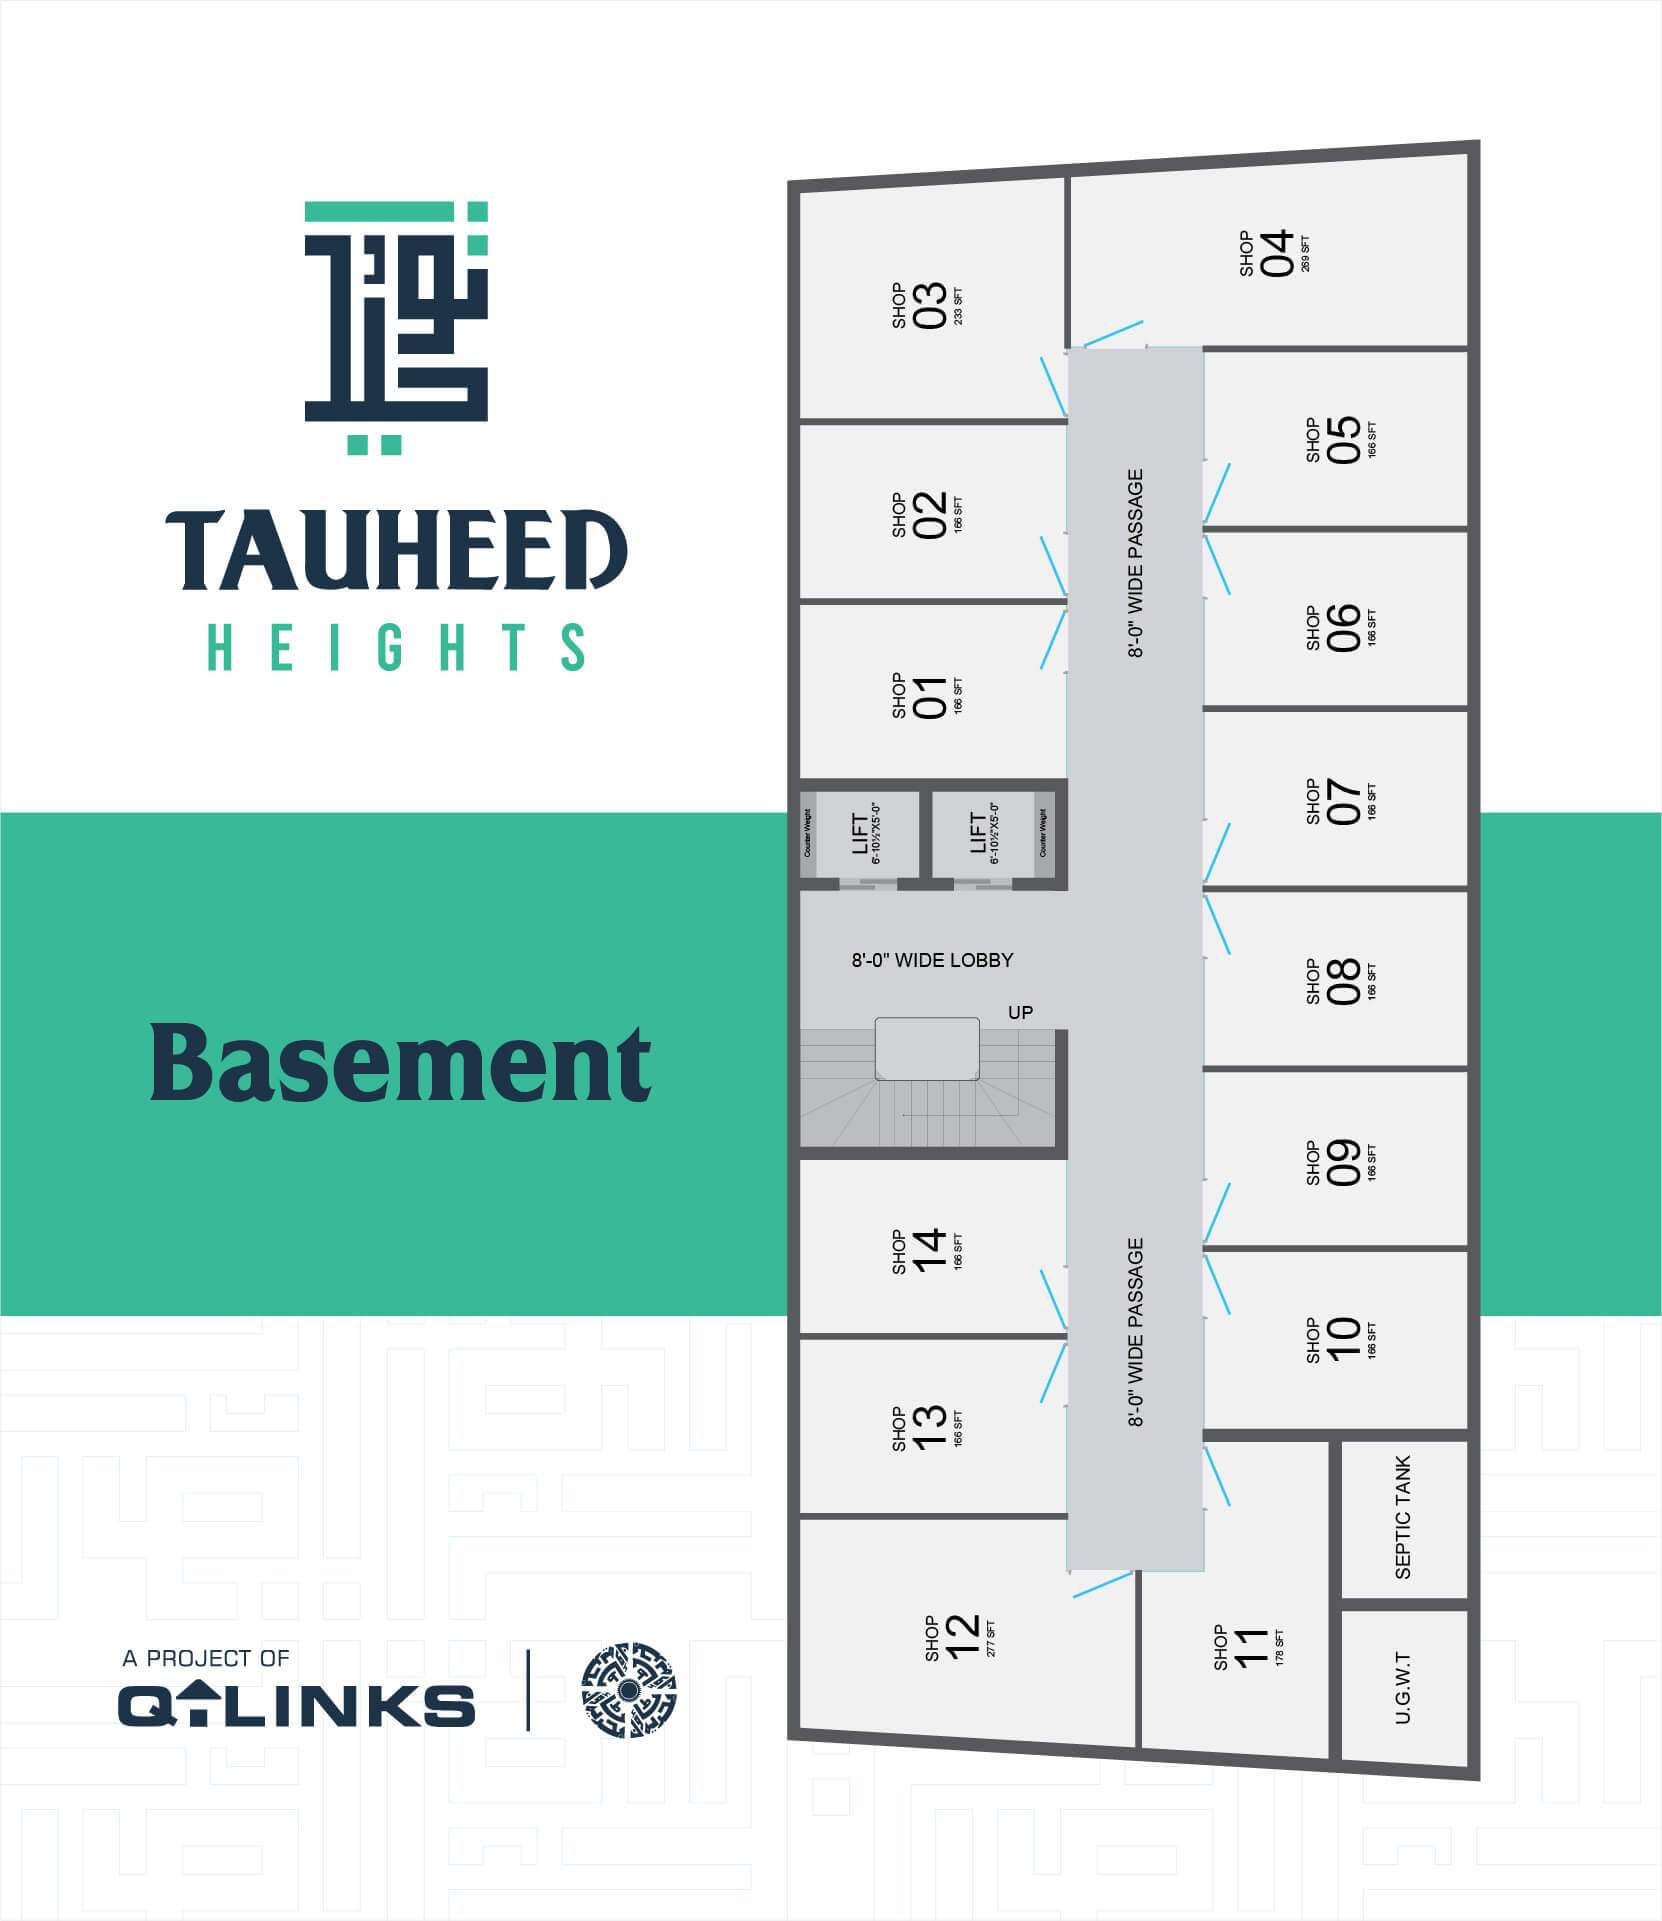 Q Links Tauheed Heights Bahria Town Lahore Basement Plan